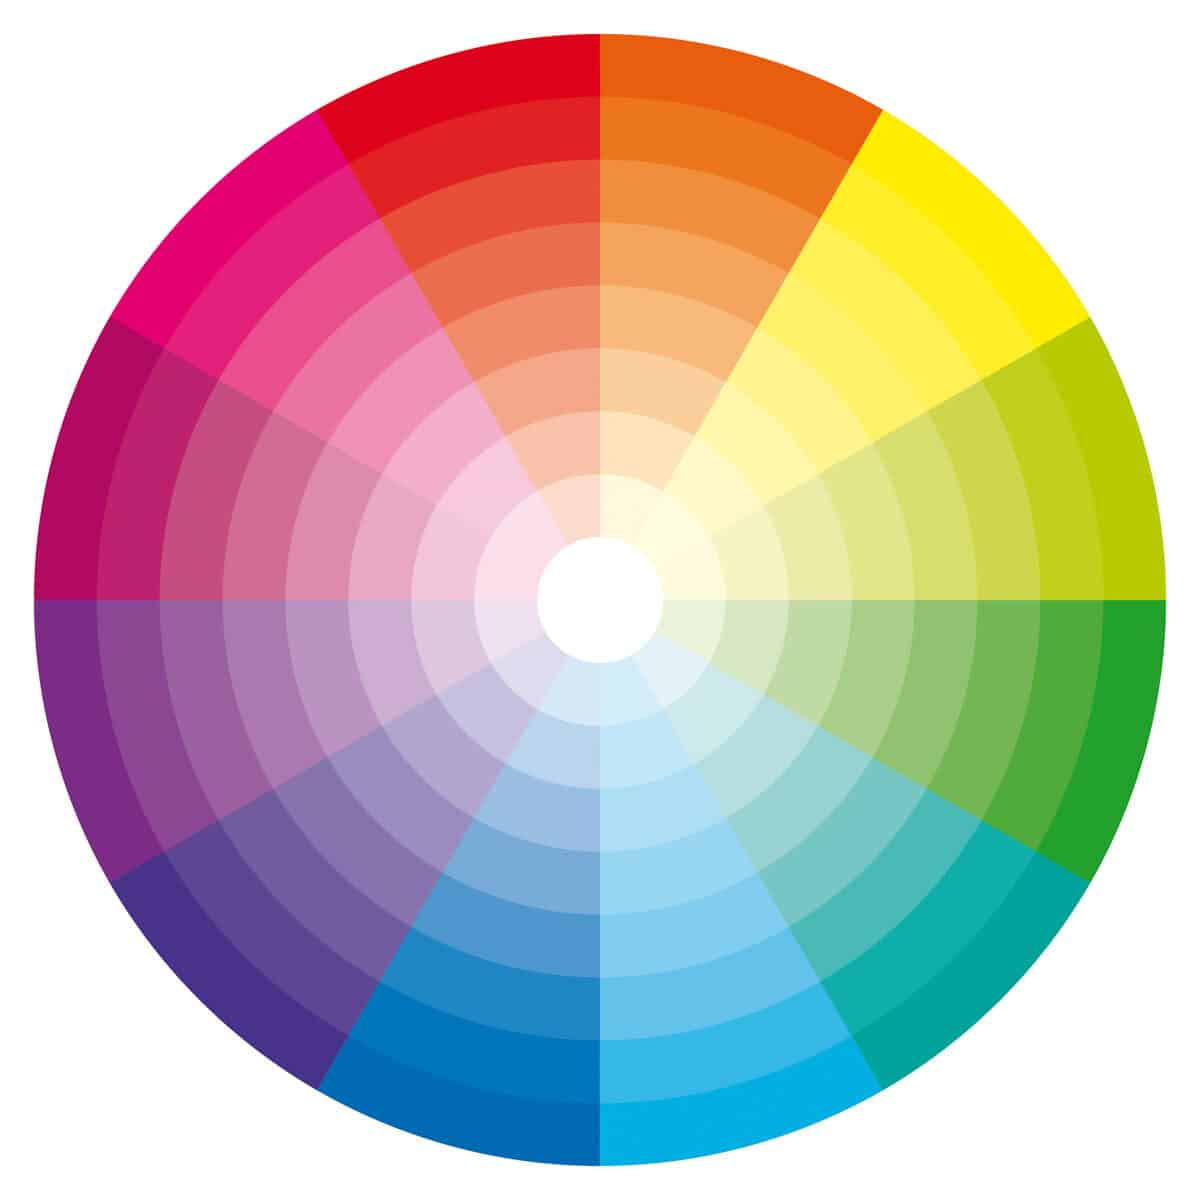 A color wheel showing eachy primary color and secondary color's shades.